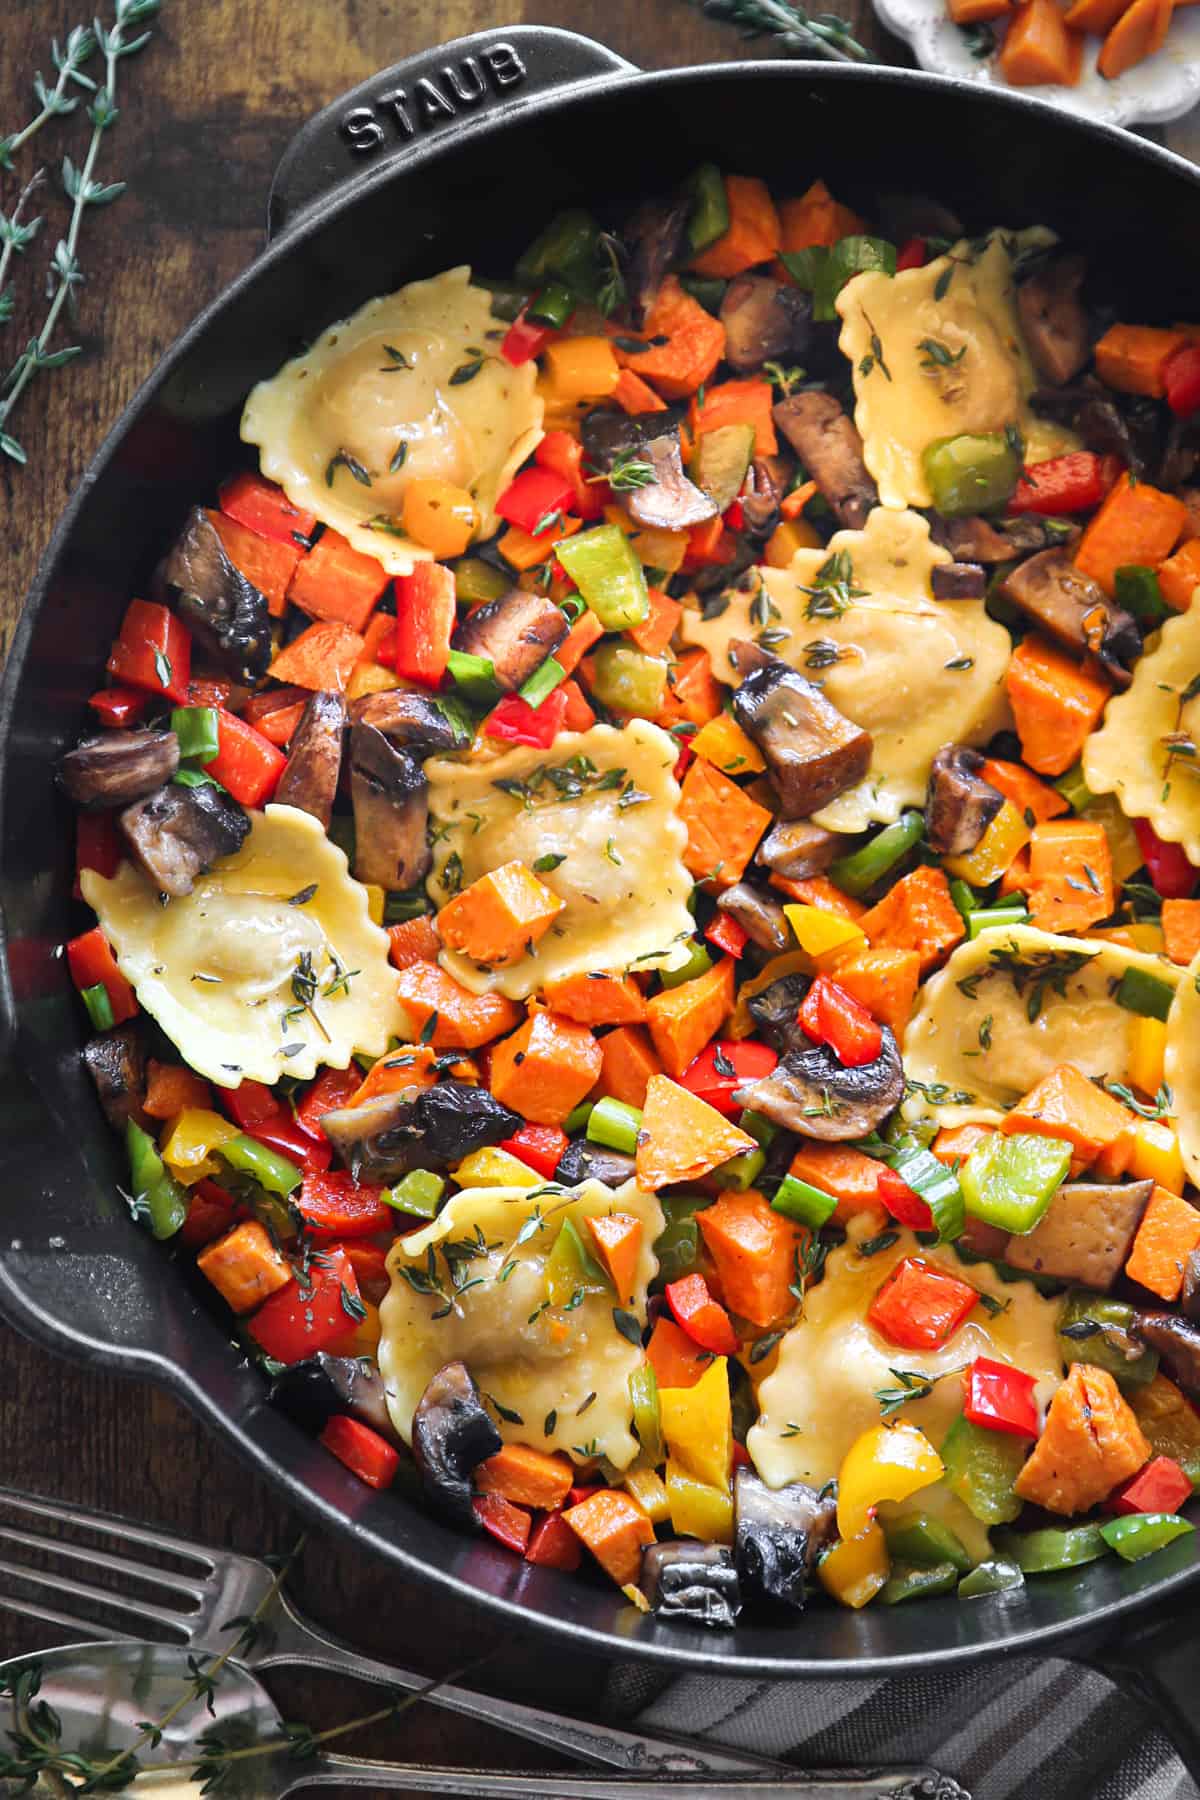 Ravioli with Sweet Potatoes, Portobello Mushrooms, Bell Peppers in a cast iron skillet.